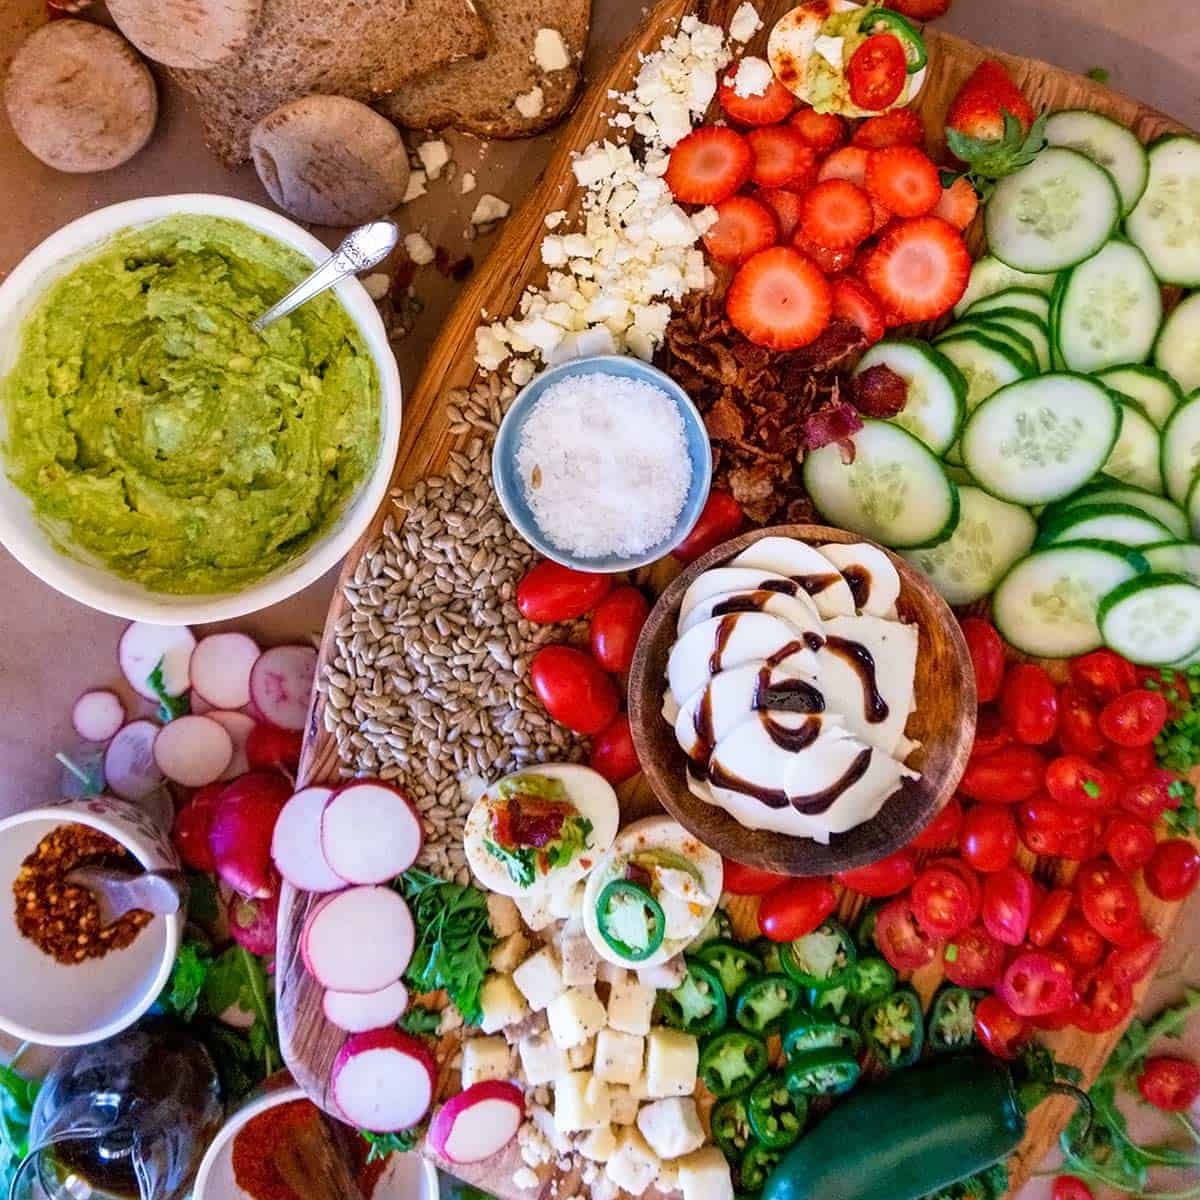 Avocado toast toppings bar with a platter of toppings and avocado spread